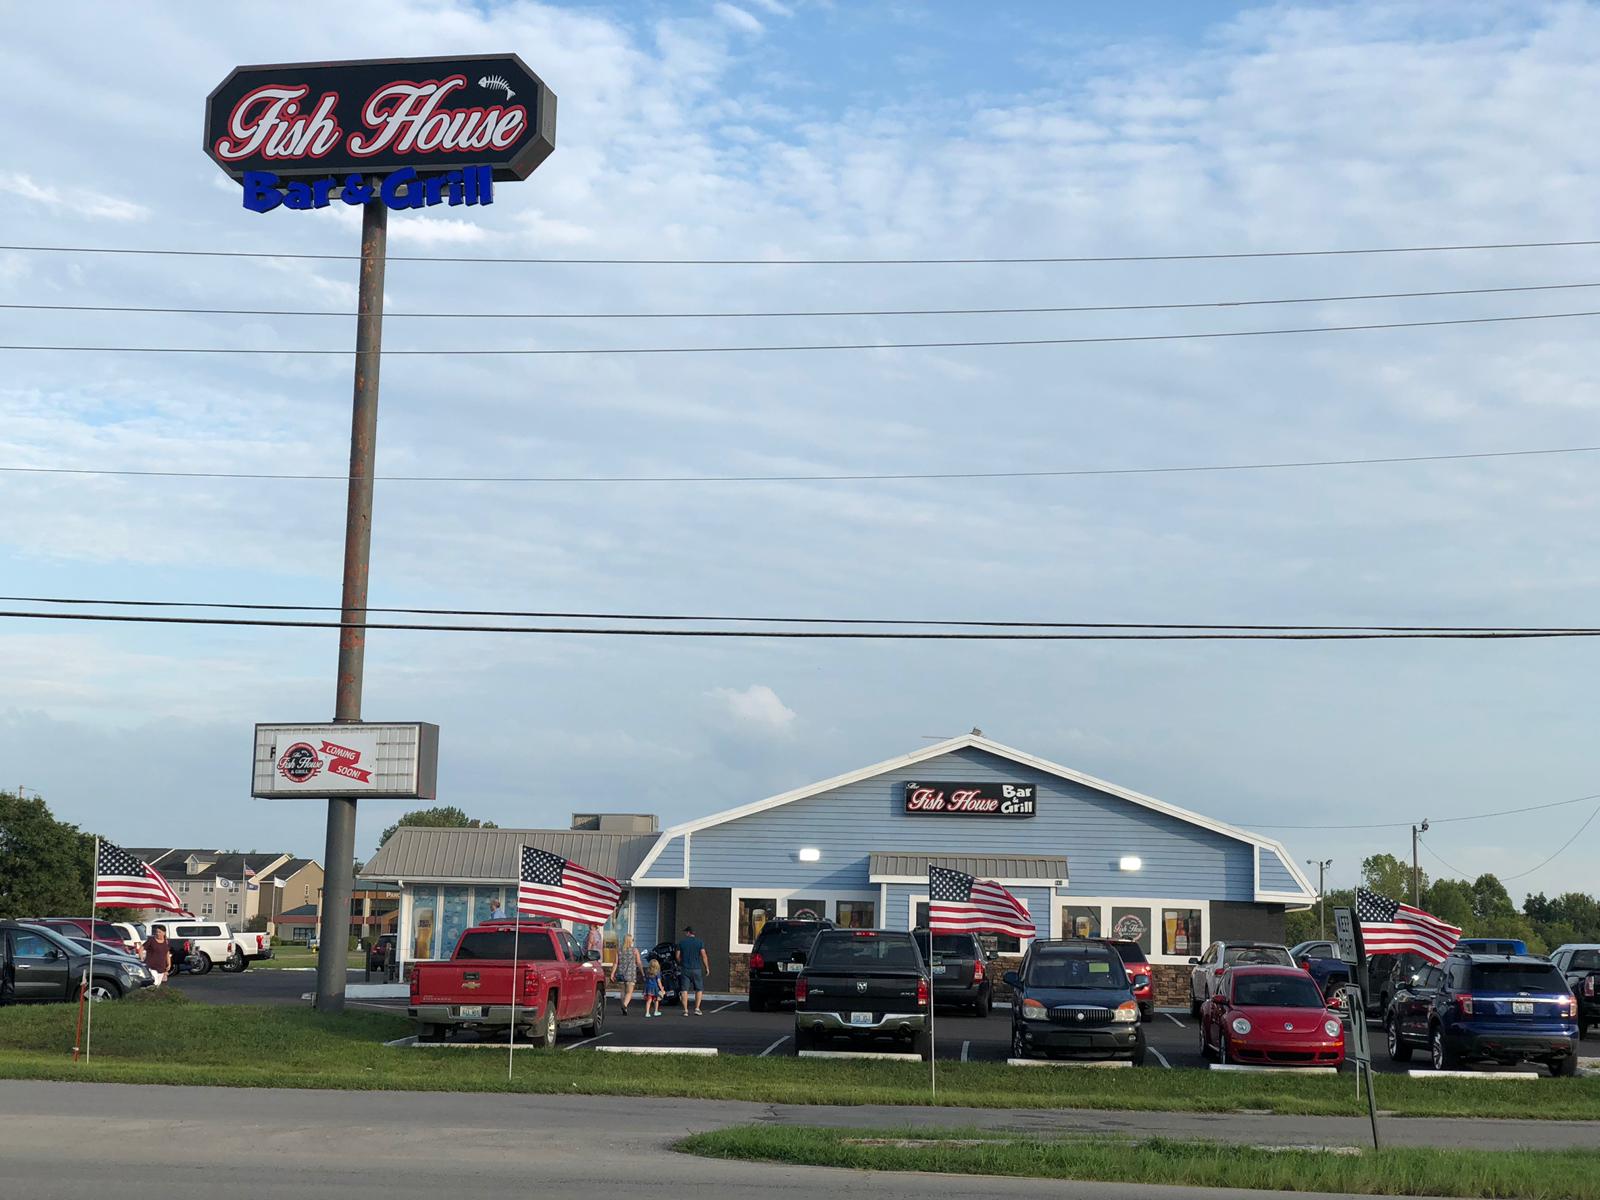 The Fish House Bar and Grill